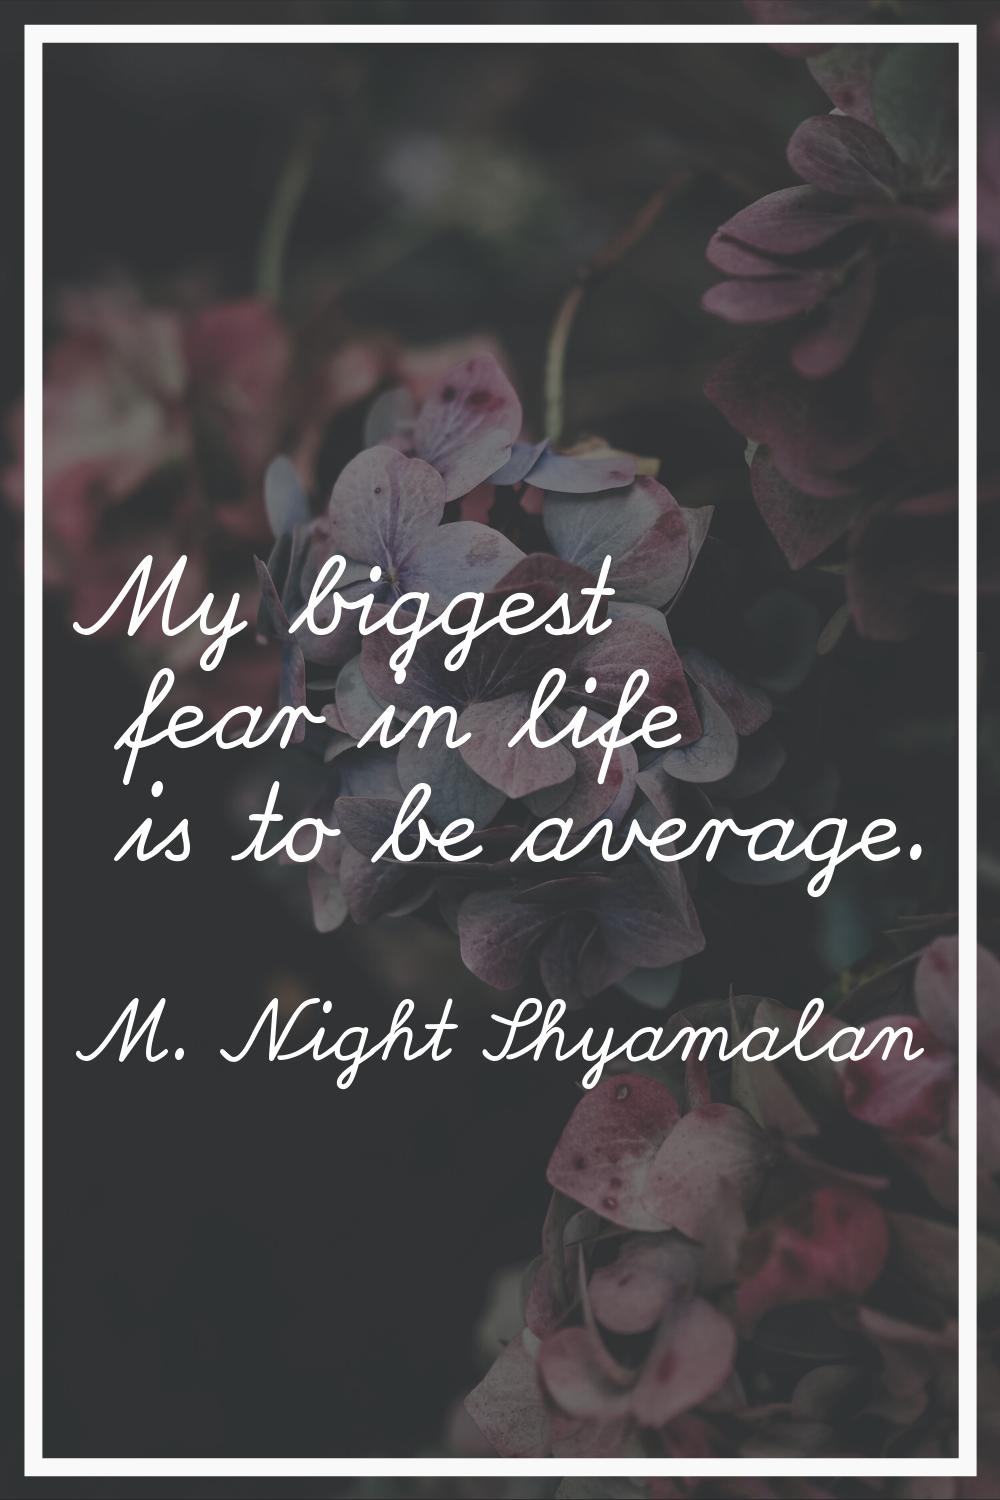 My biggest fear in life is to be average.